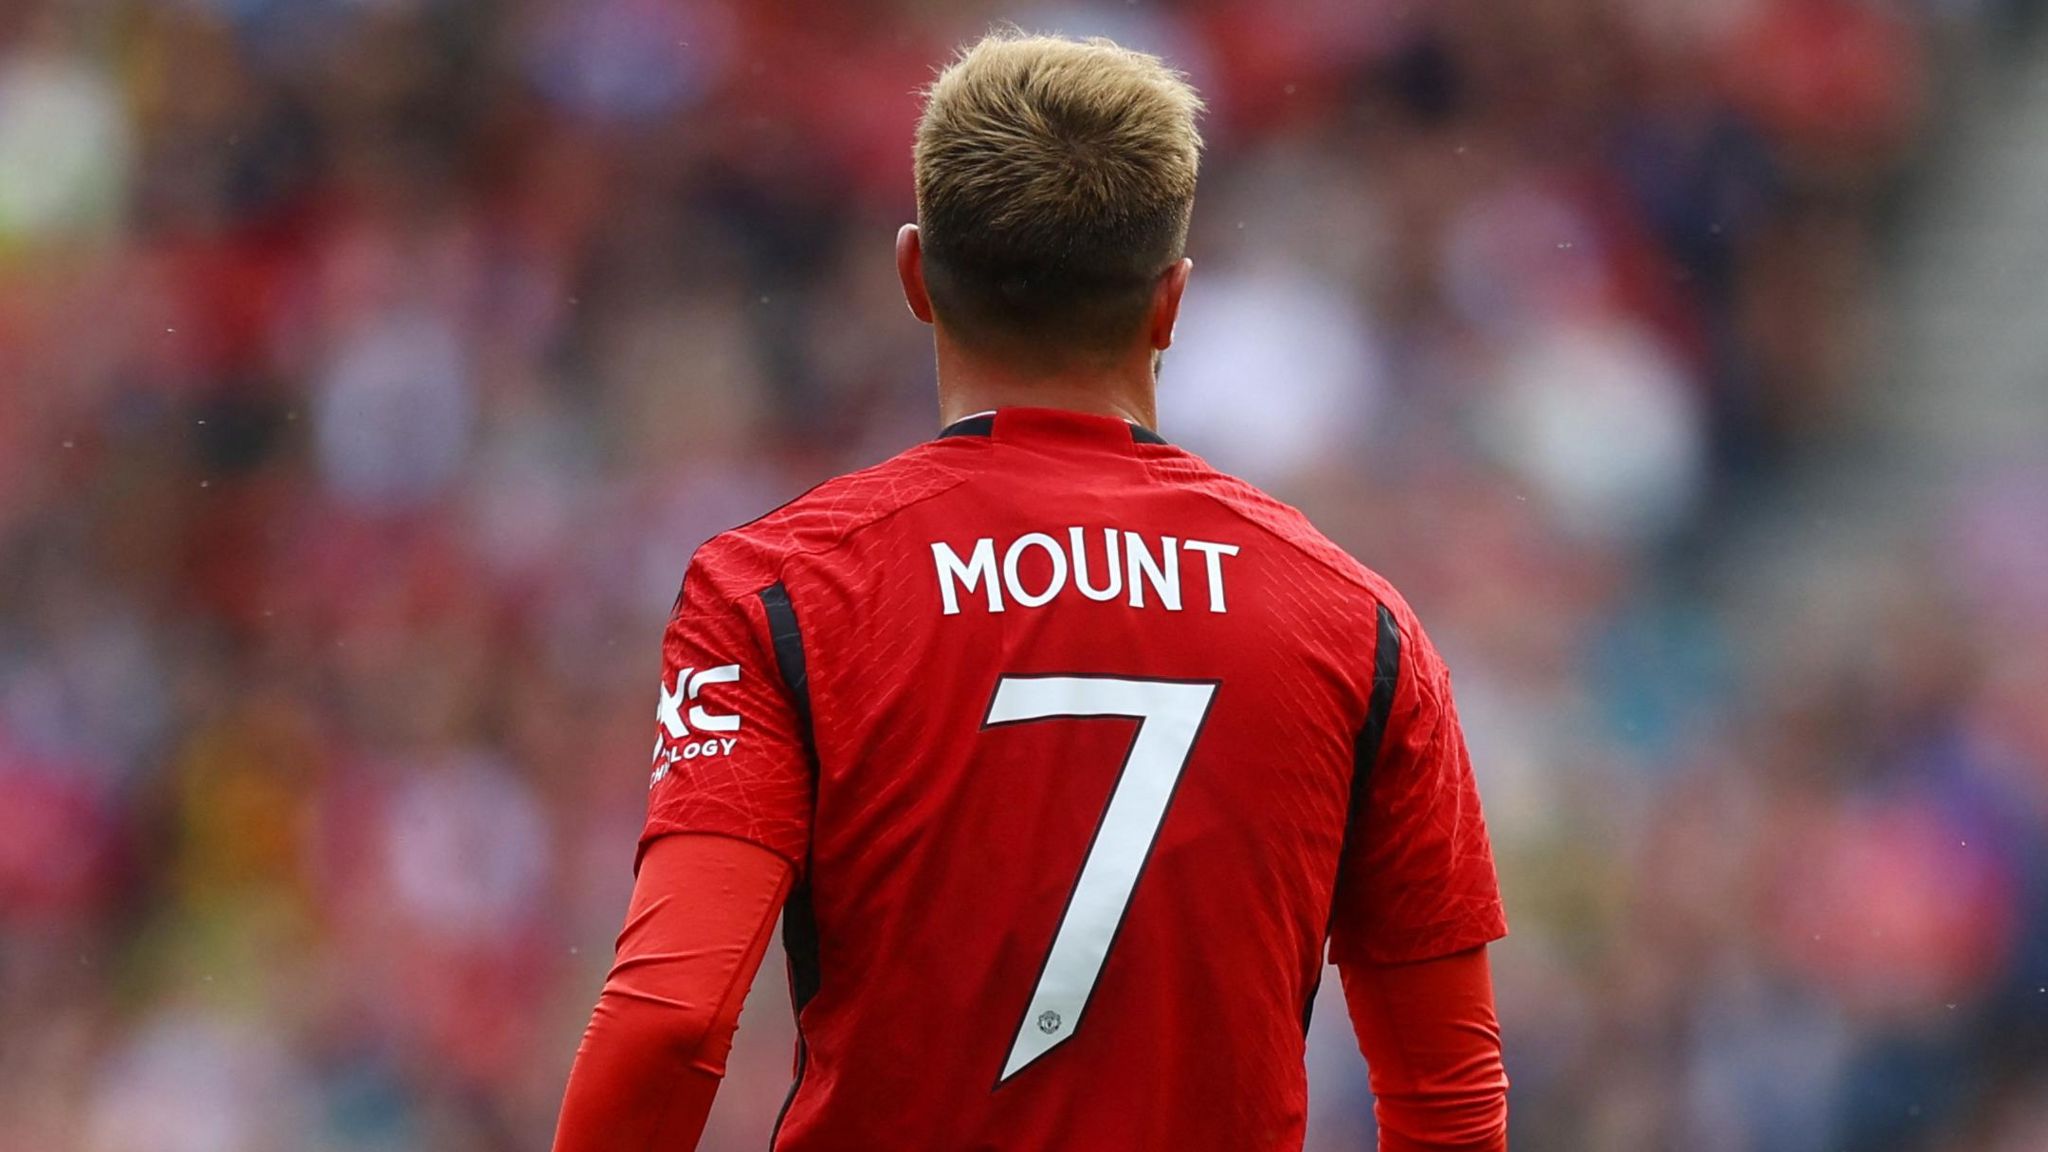 Mason Mount in Manchester United colours.